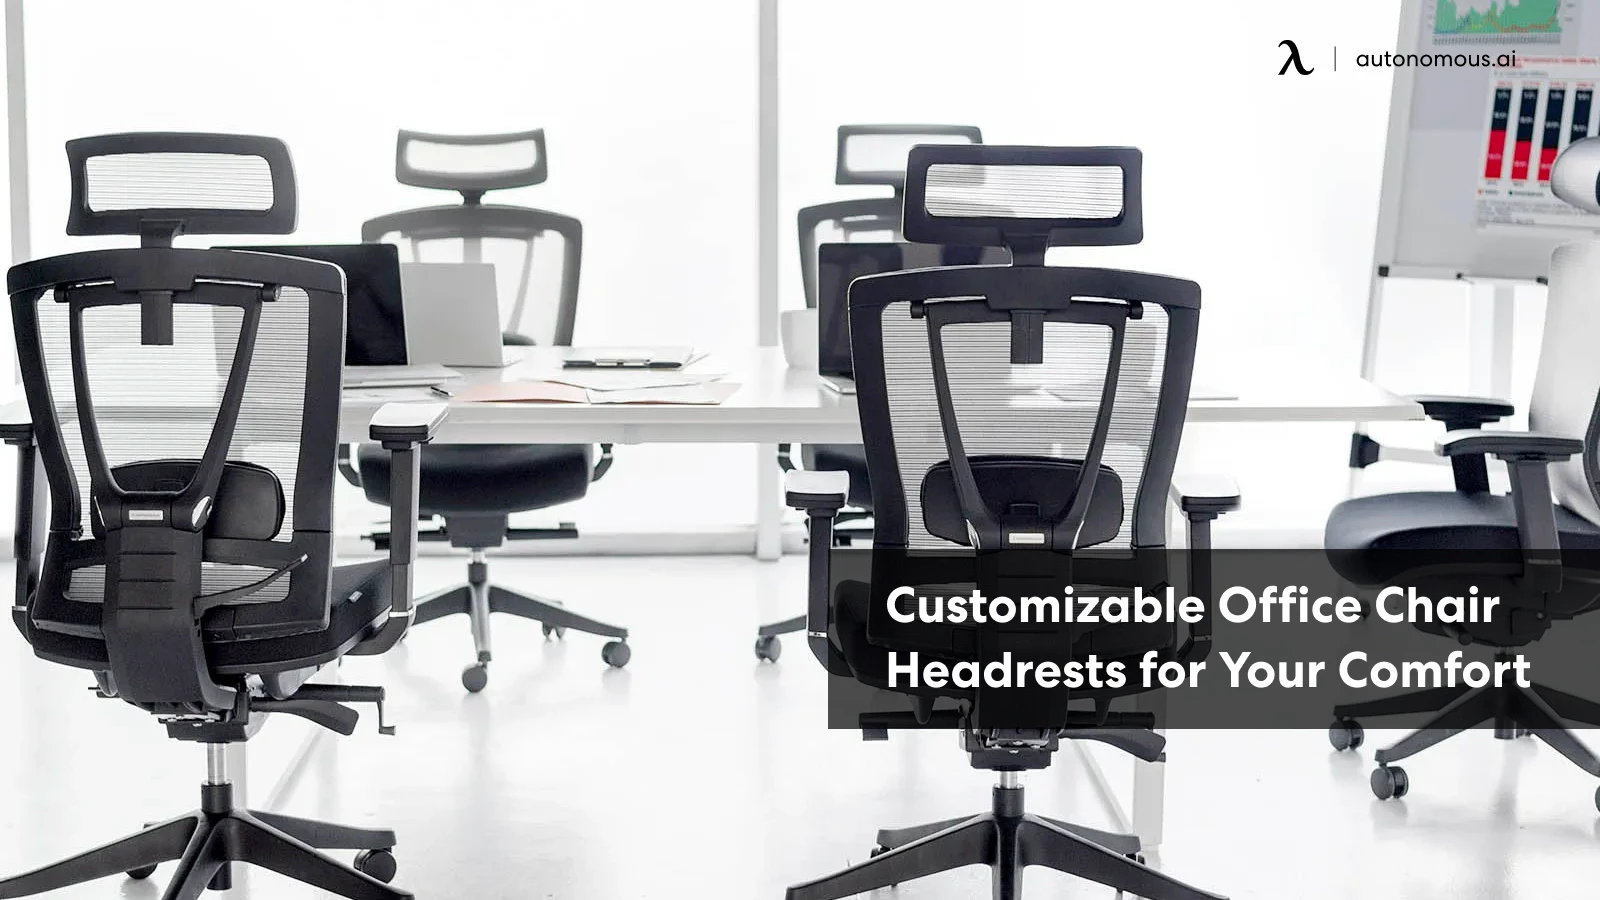 Finding Your Perfect Fit: Customizable Office Chair Headrests for Personalized Comfort